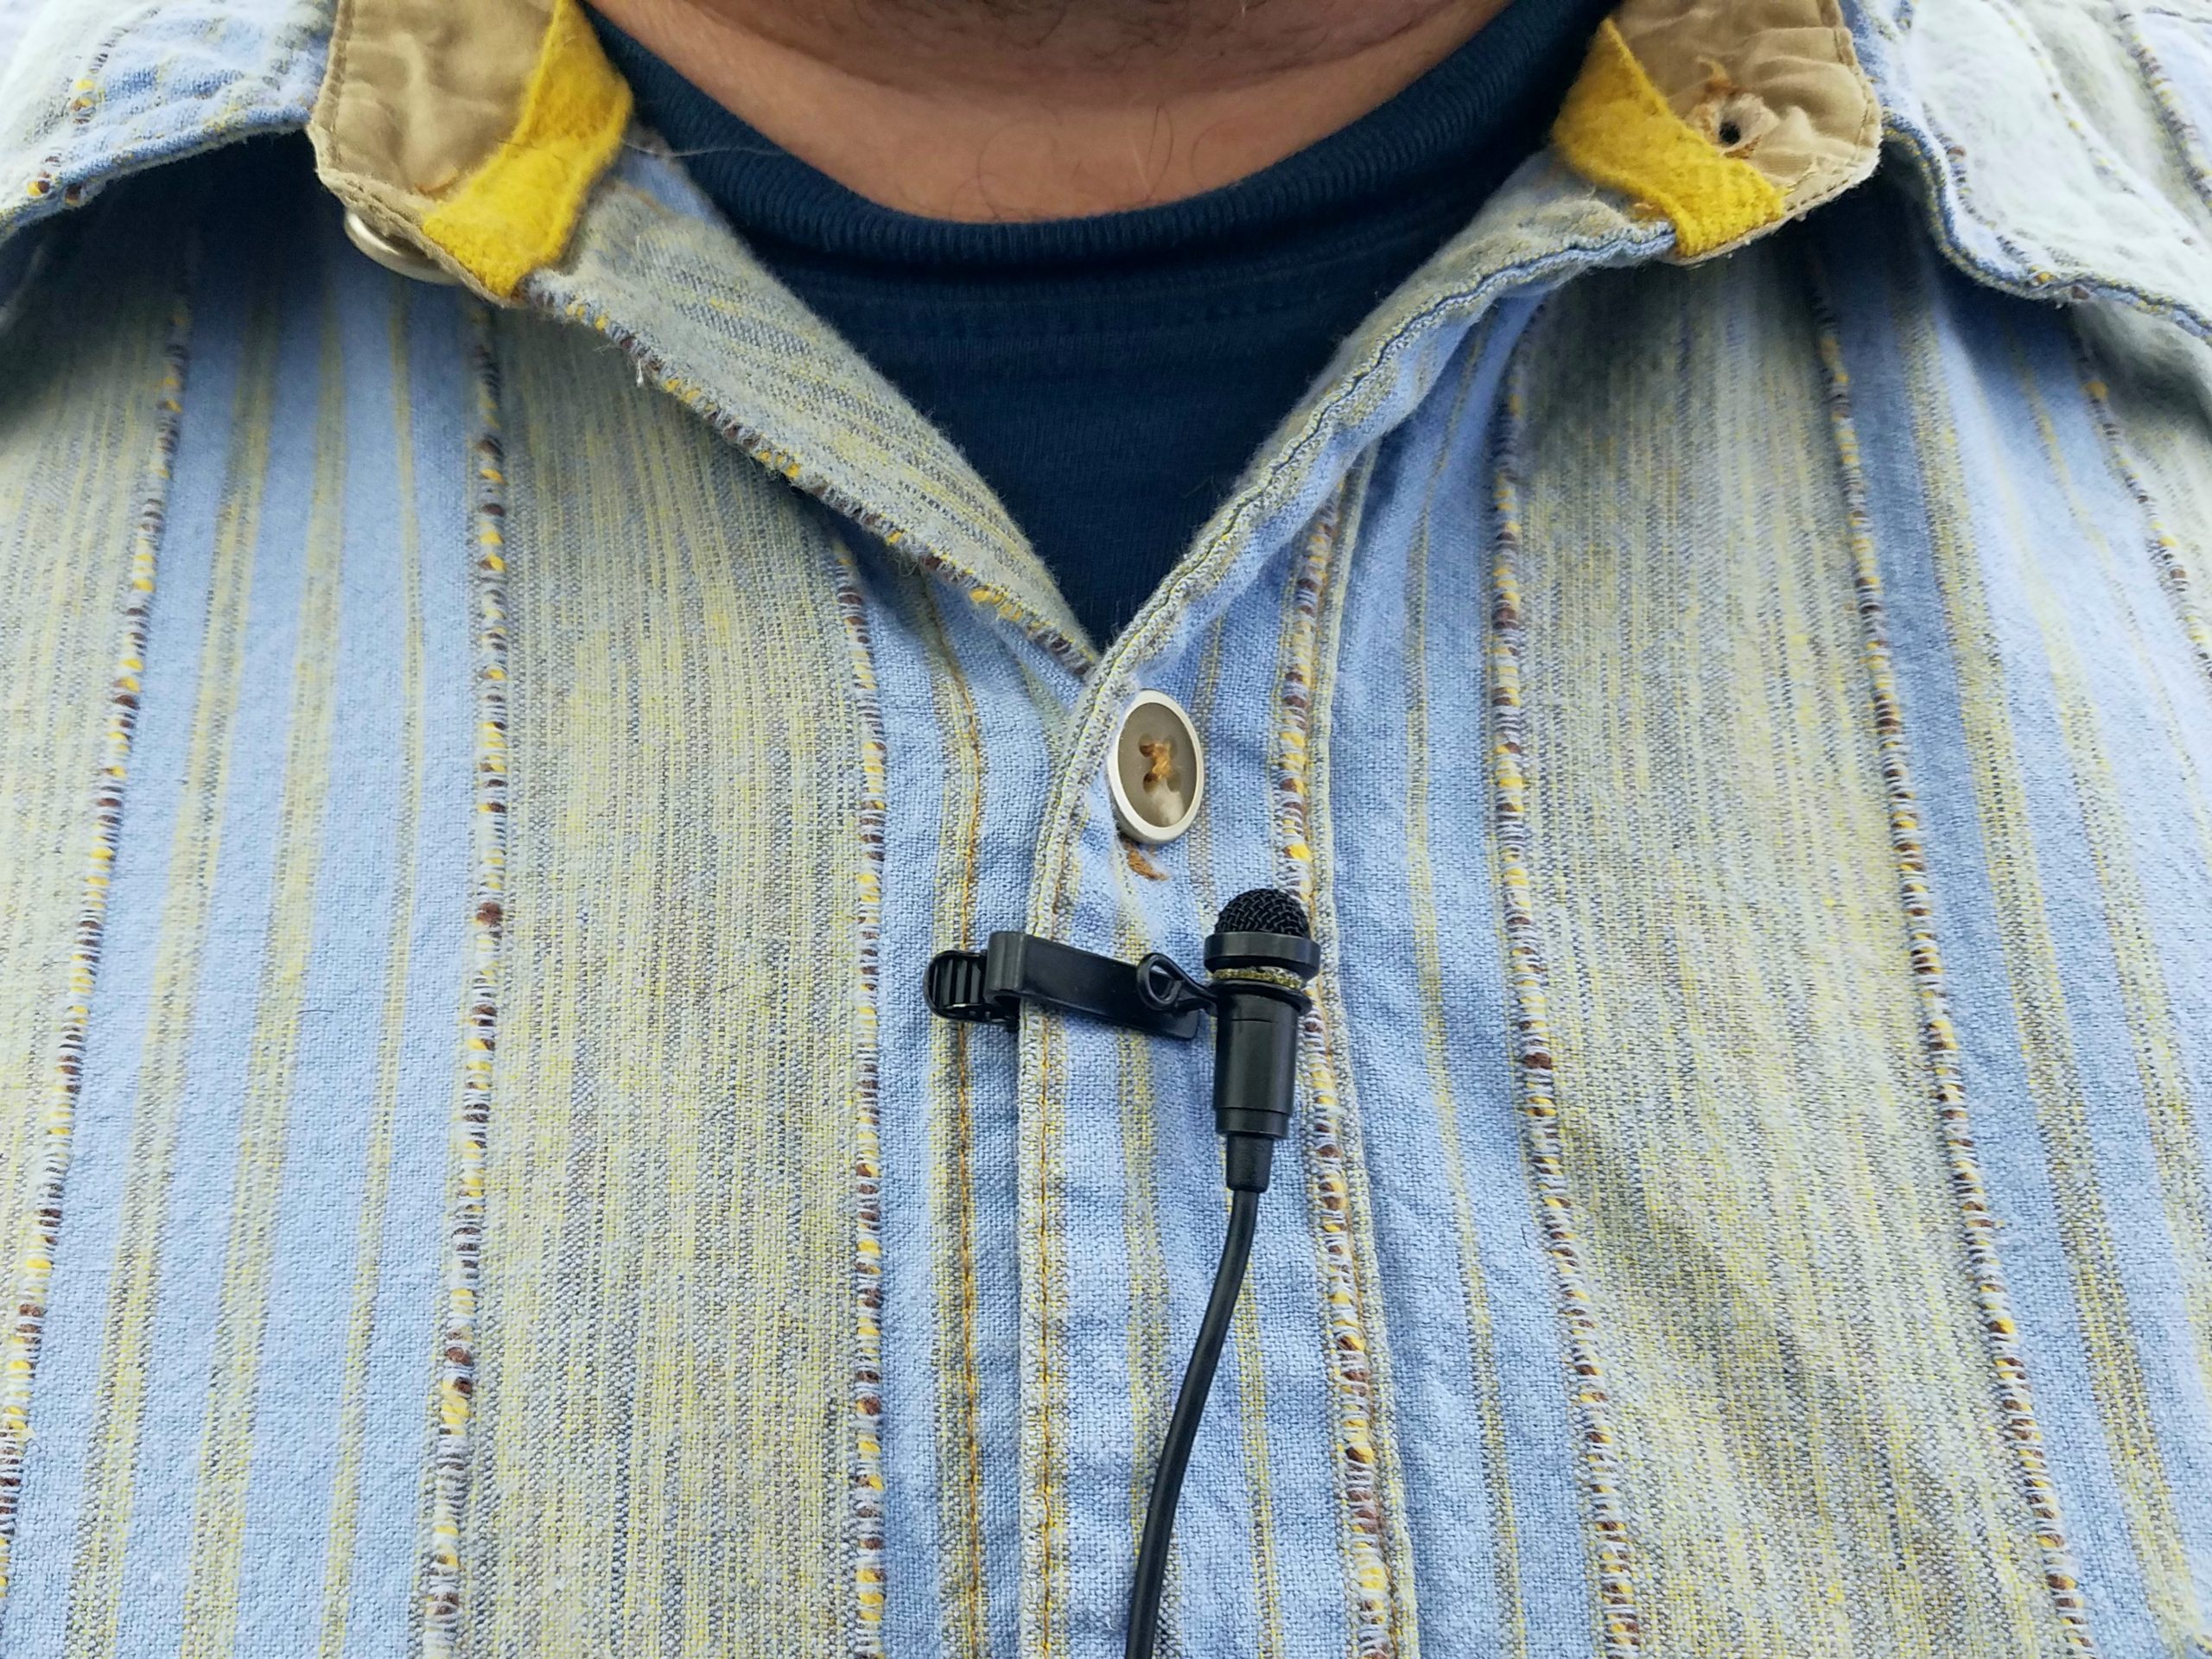 A small microphone pined to a man's lapel.